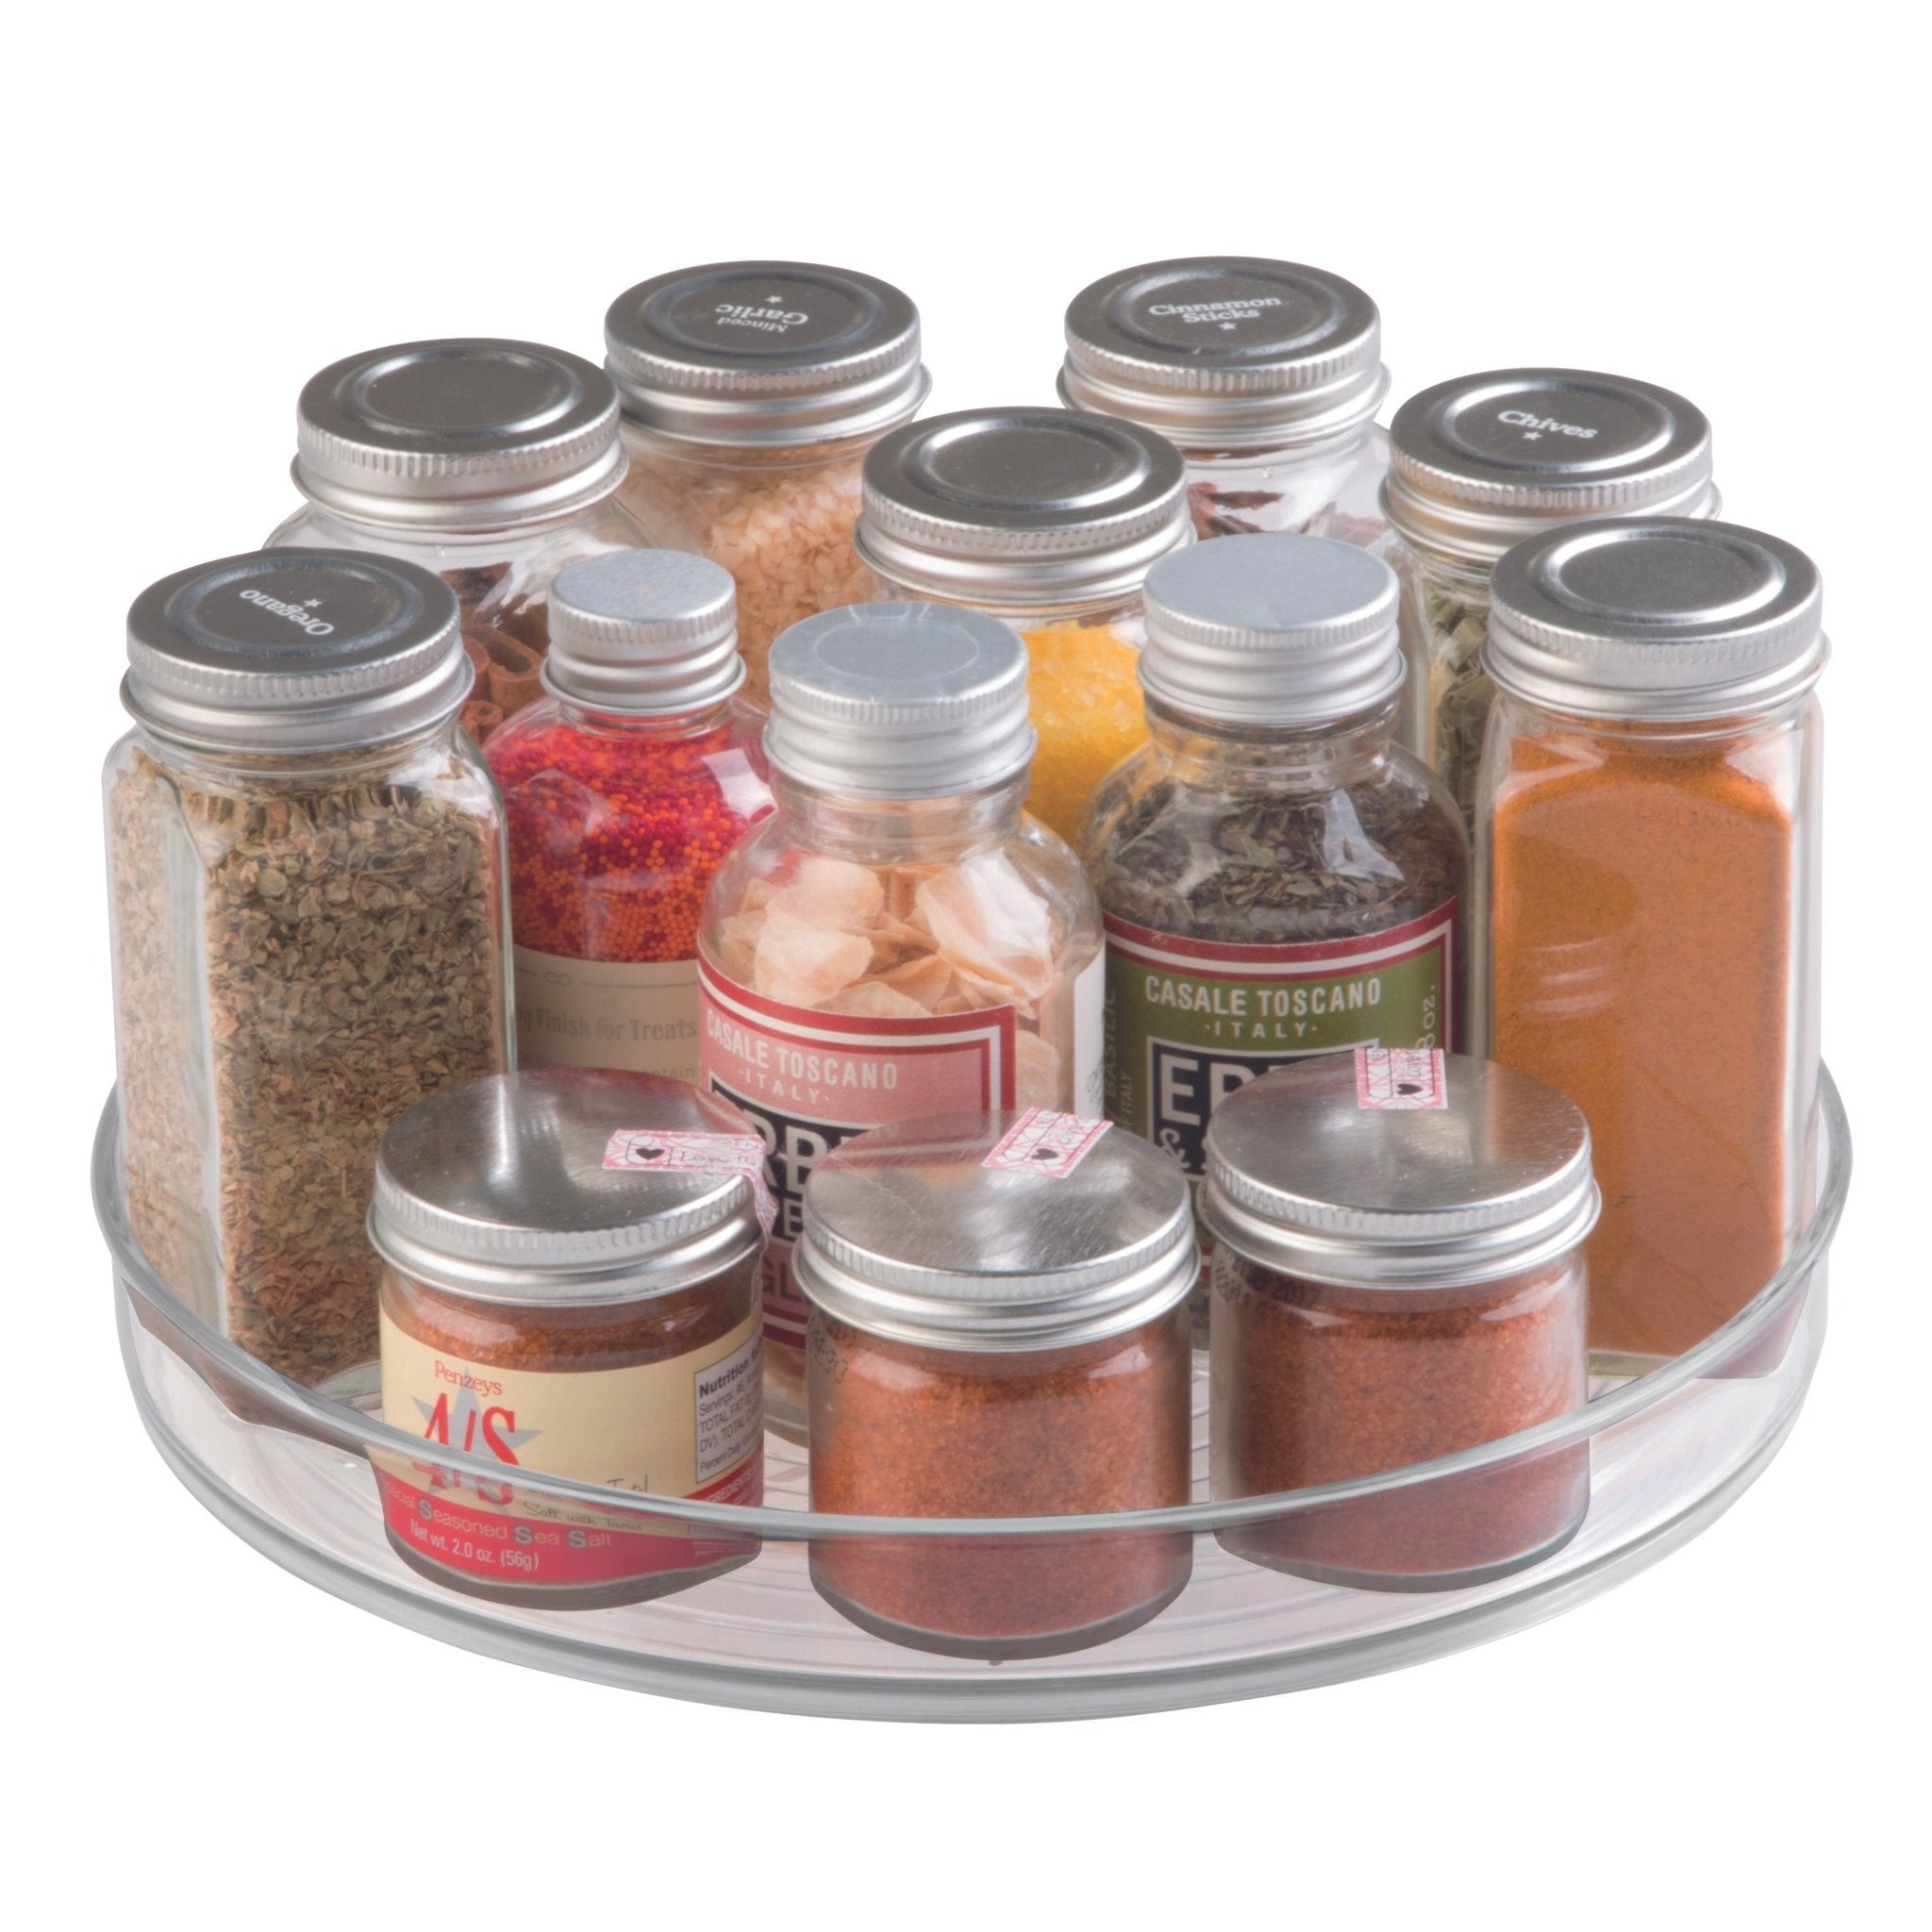 idesign linus - rotated lazy susan clear - 23cm x 4cm - BINS AND BOXES